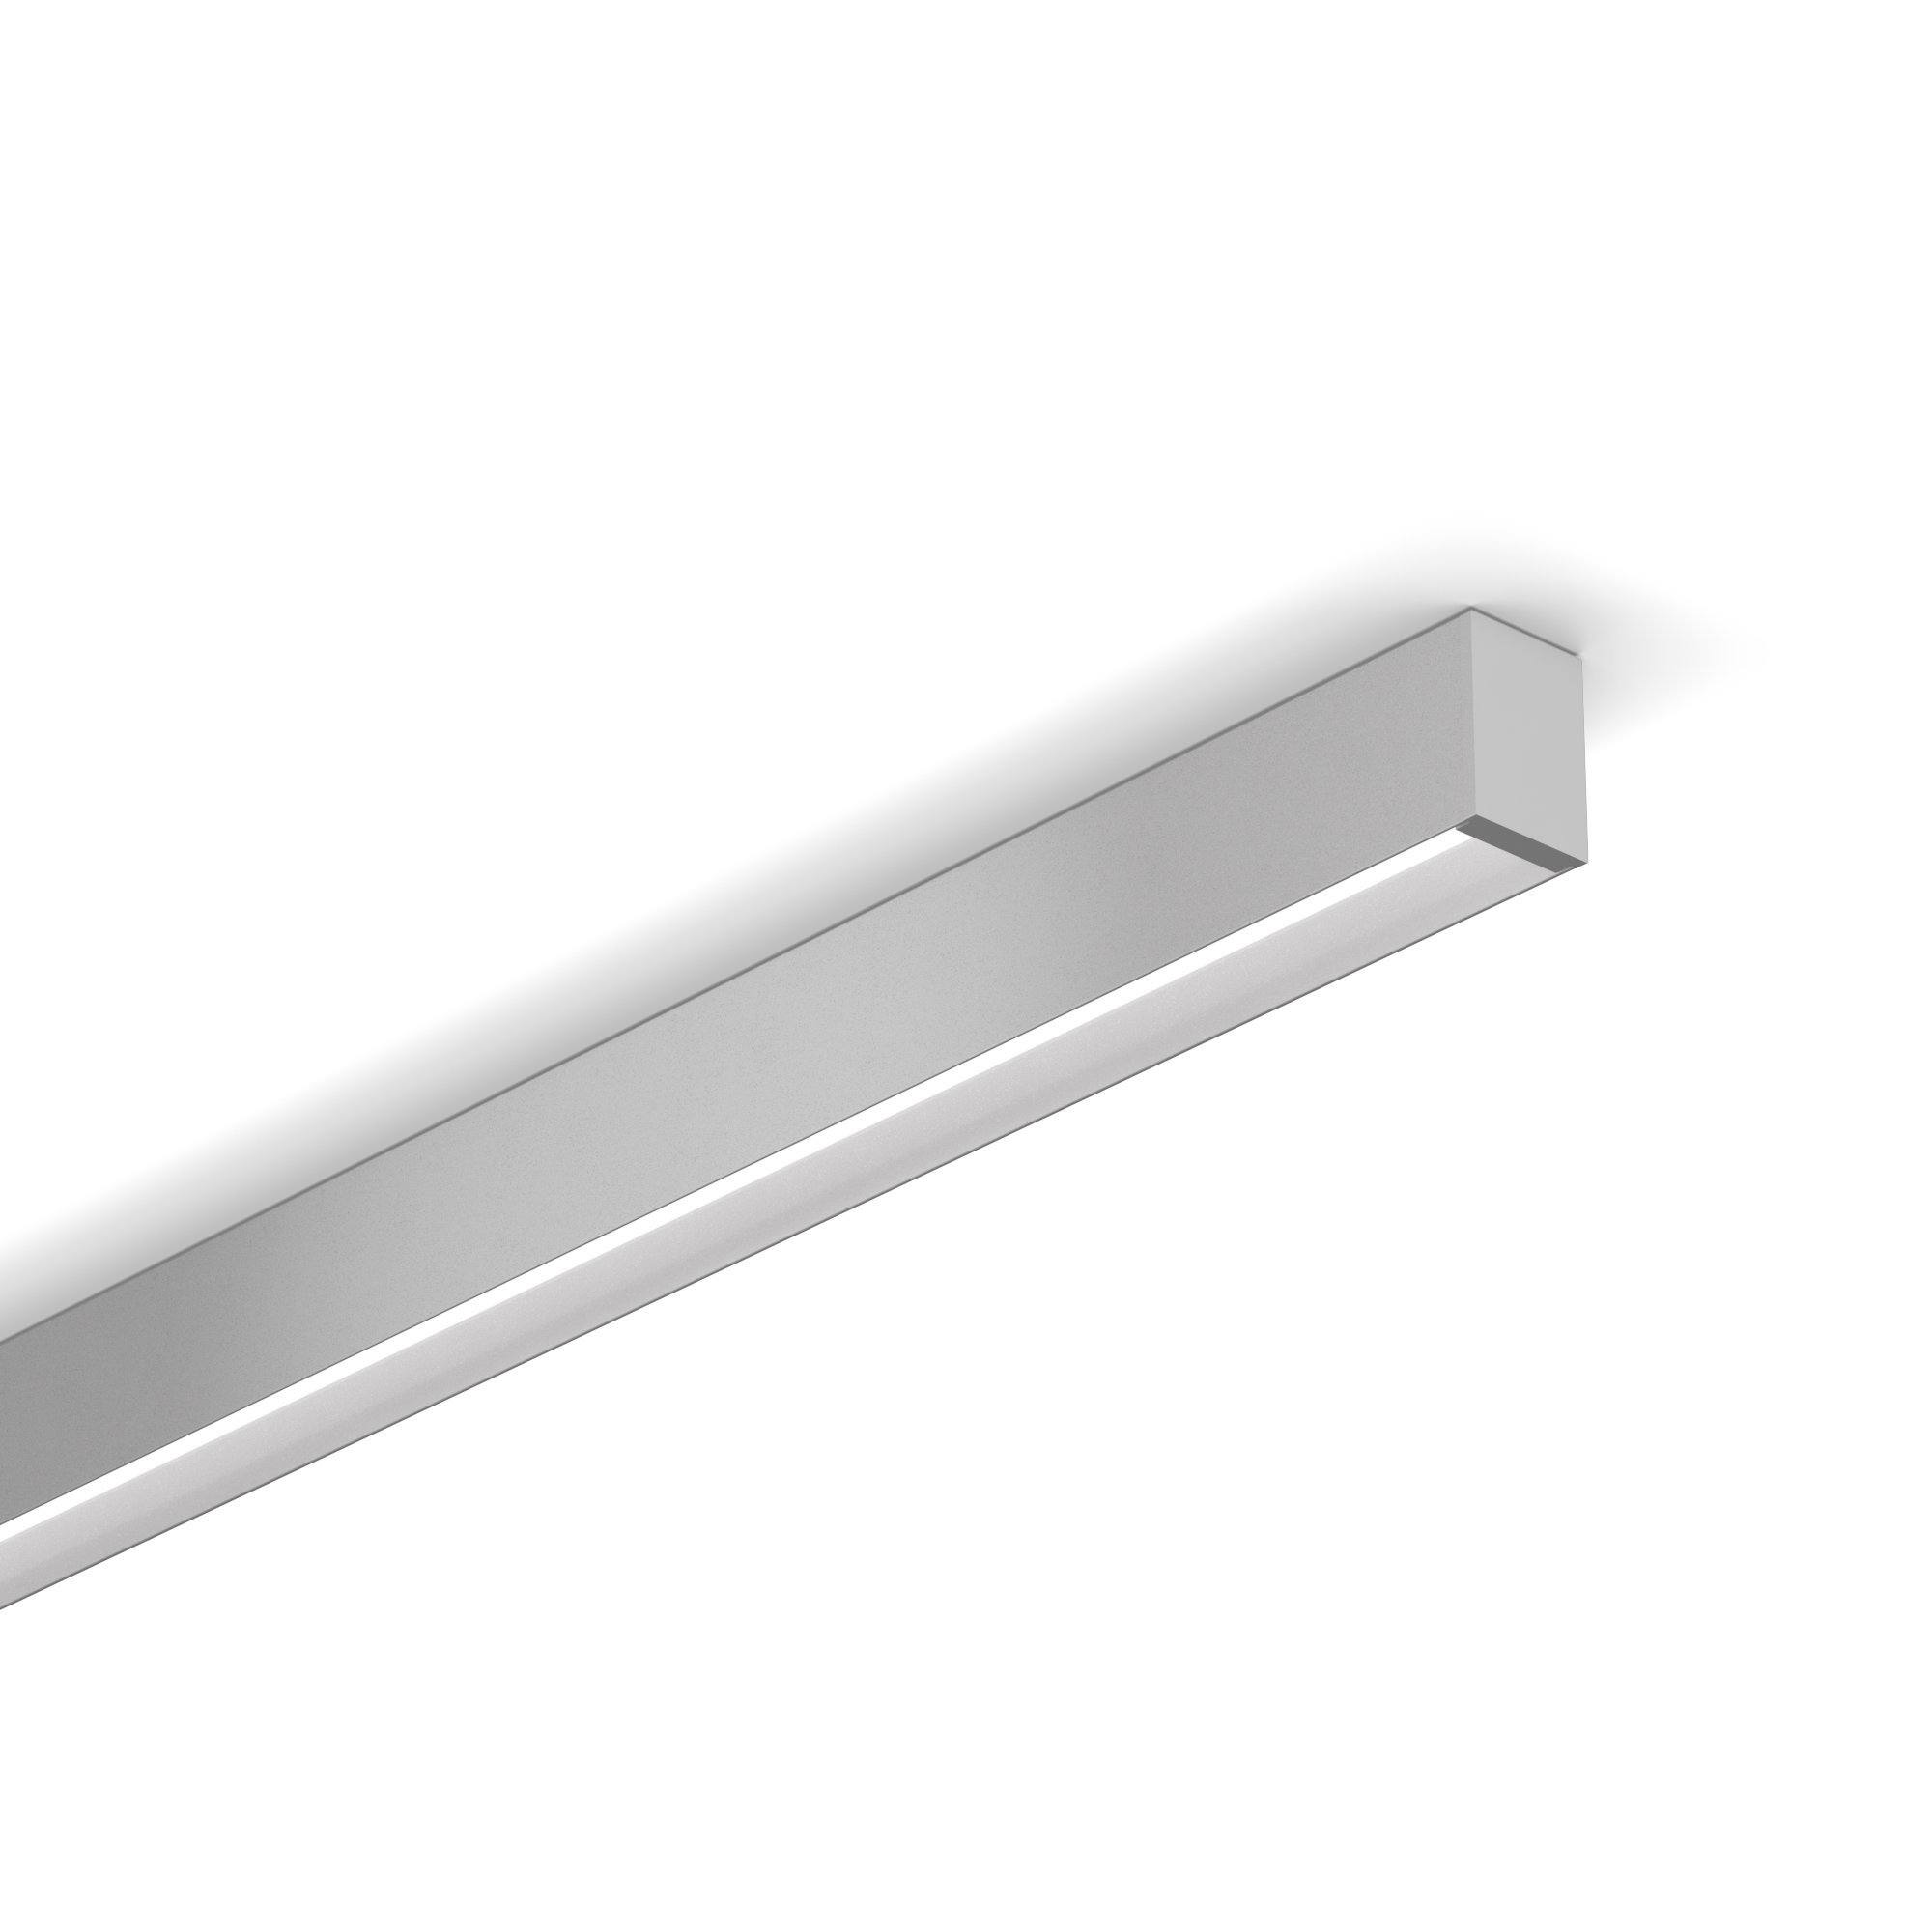 0.95” Ultra-Compact LED Linear
NANOBeam is 0.95” wide, bringing regressed SmartBeam® capabilities to a surface-mounted form that compliments architectural space. NANOBeam features a remote driver to remove visual bulk.

 

Beam profile: 0.95” (24mm) x 1.38” (35mm)